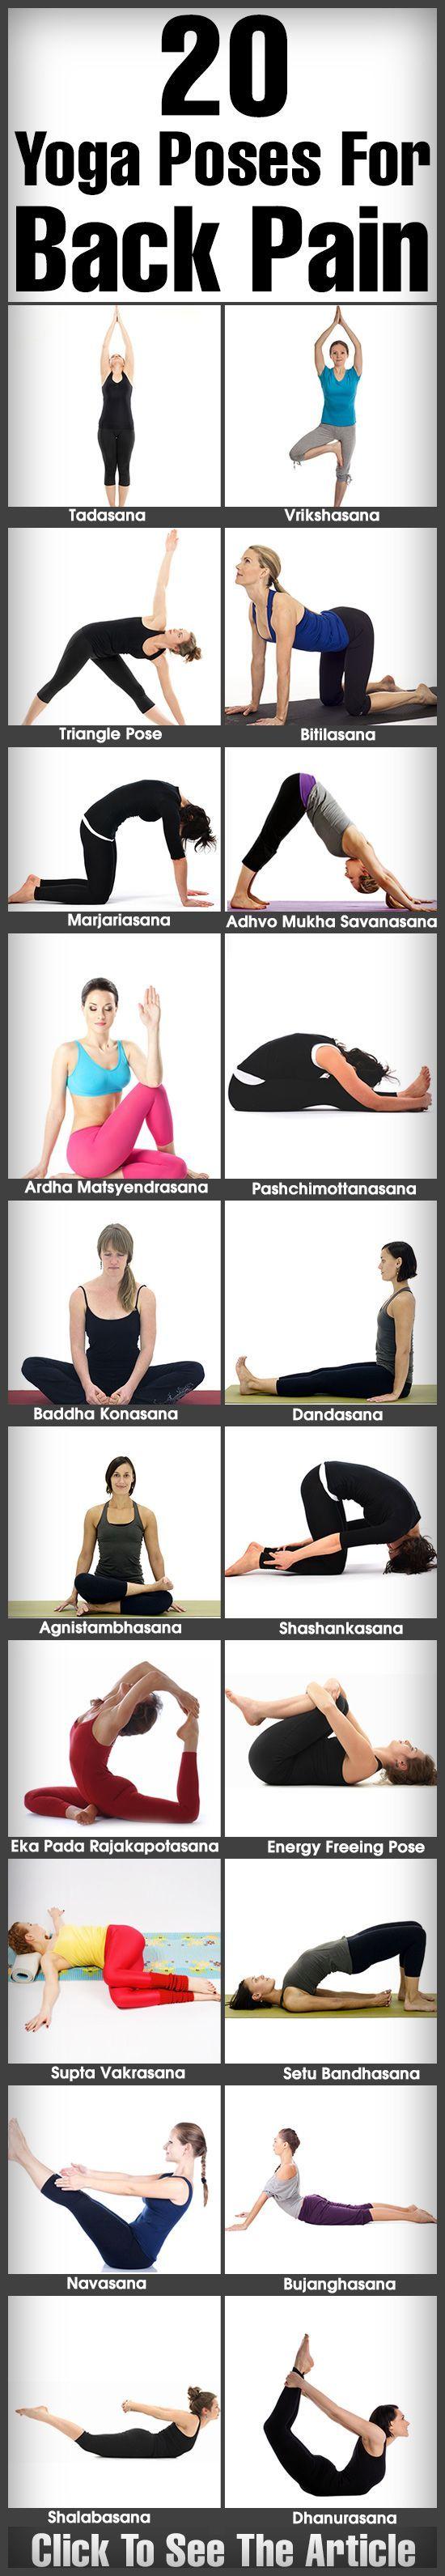 Wedding - Top 20 Yoga Poses For Back Pain